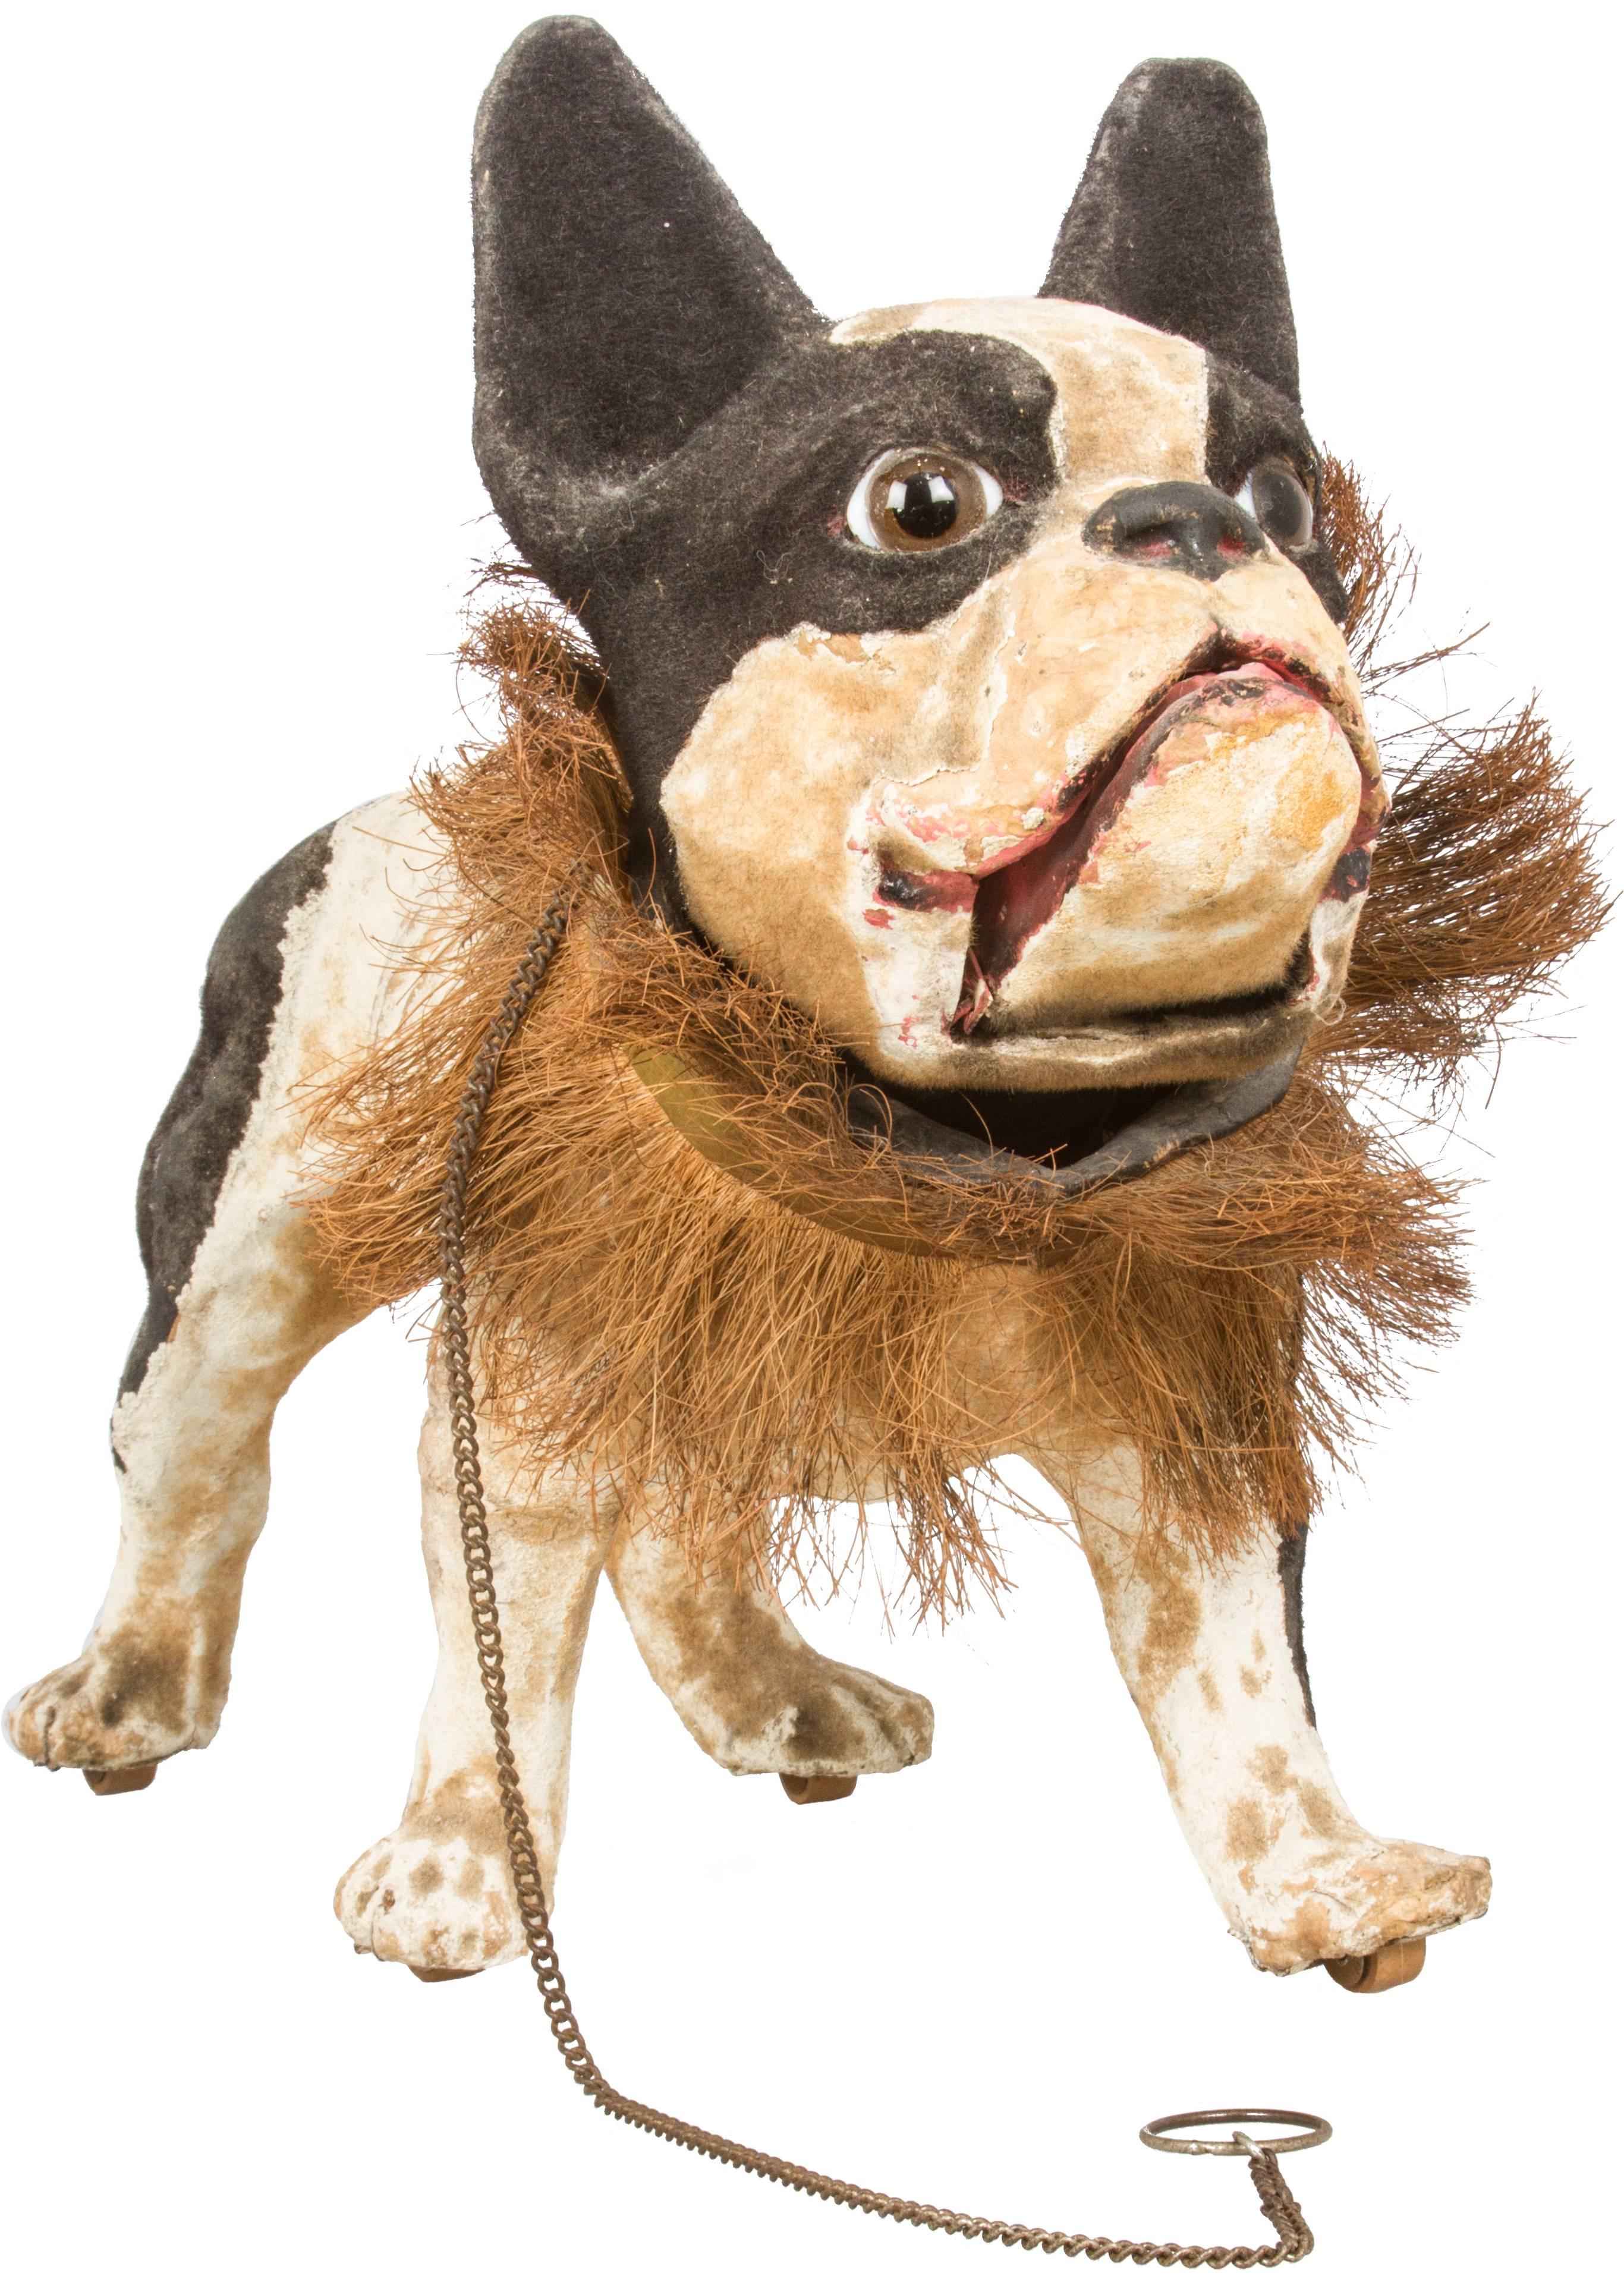 This handsome bulldog with a nodding head, has a collar made from coconut husks and an articulated jaw that opens when a chain that operates the growler mechanism is pulled. Also having wooden castors under the paws for movement.